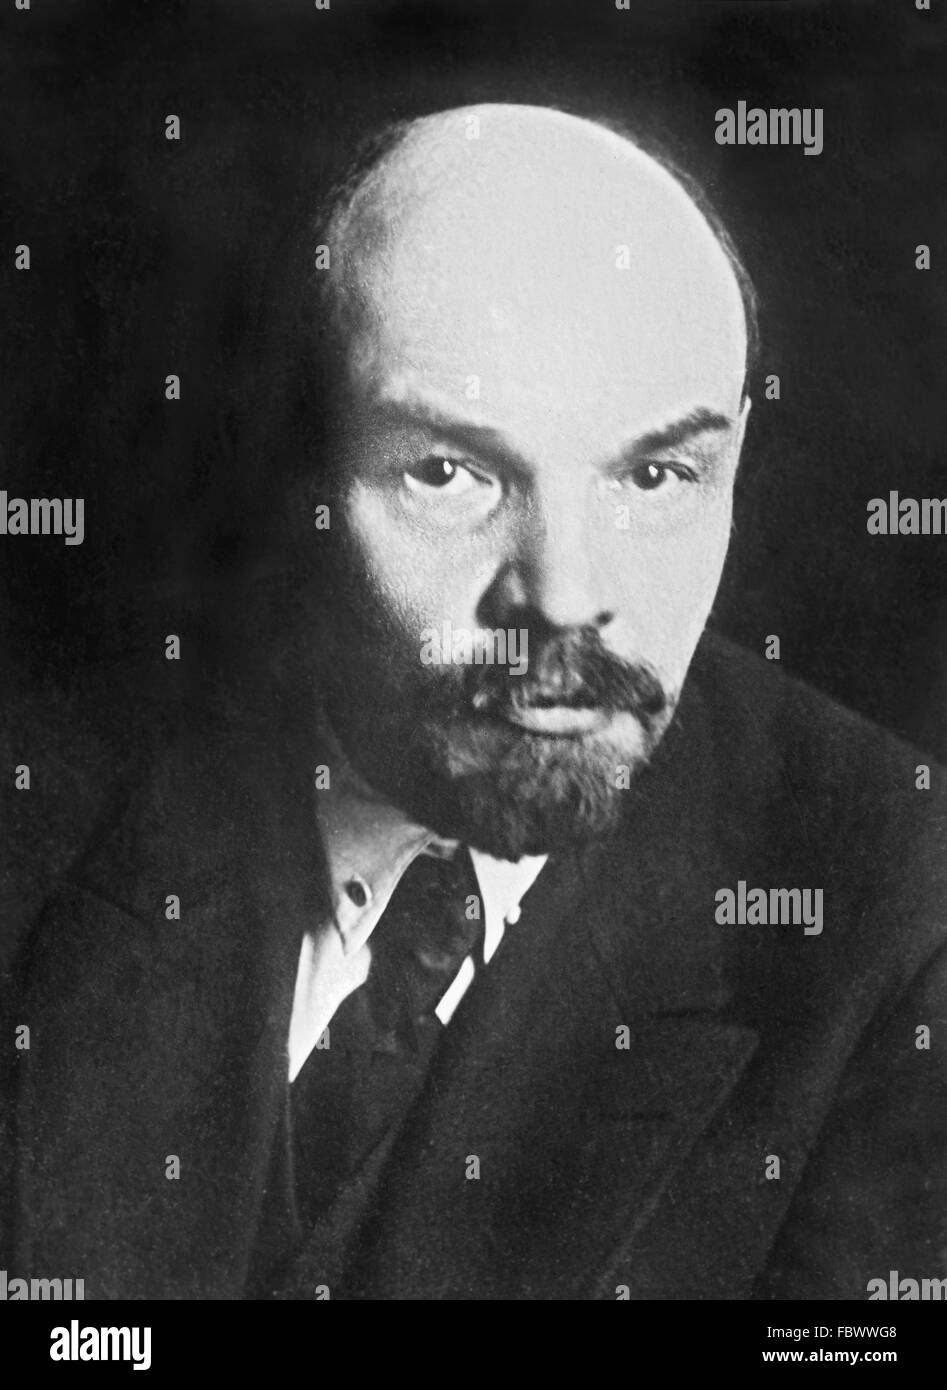 Vladimir Lenin (Vladimir Ilyich Ulyanov), Chairman of the Council of People's Commissars of the Russian SFSR and subsequently Premier of the Soviet Union, Stock Photo